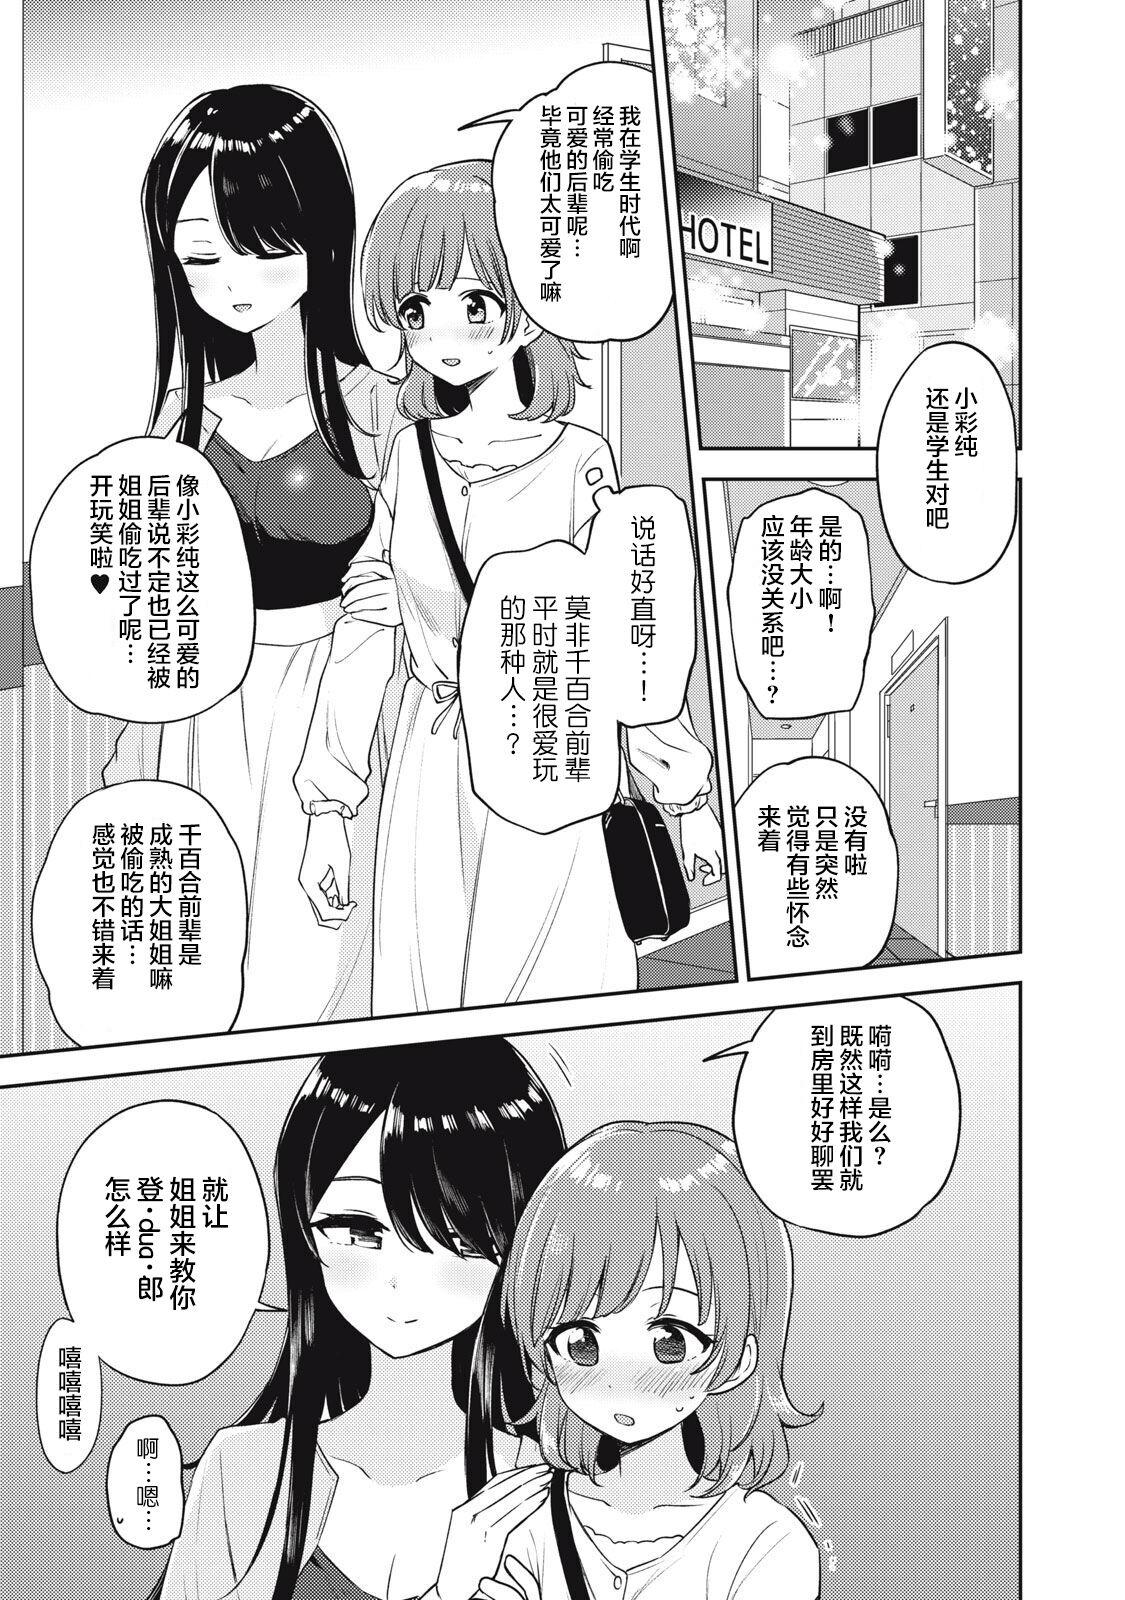 Bunduda Asumi-chan Is Interested In Lesbian Brothels! Extra Episode High Heels - Page 3